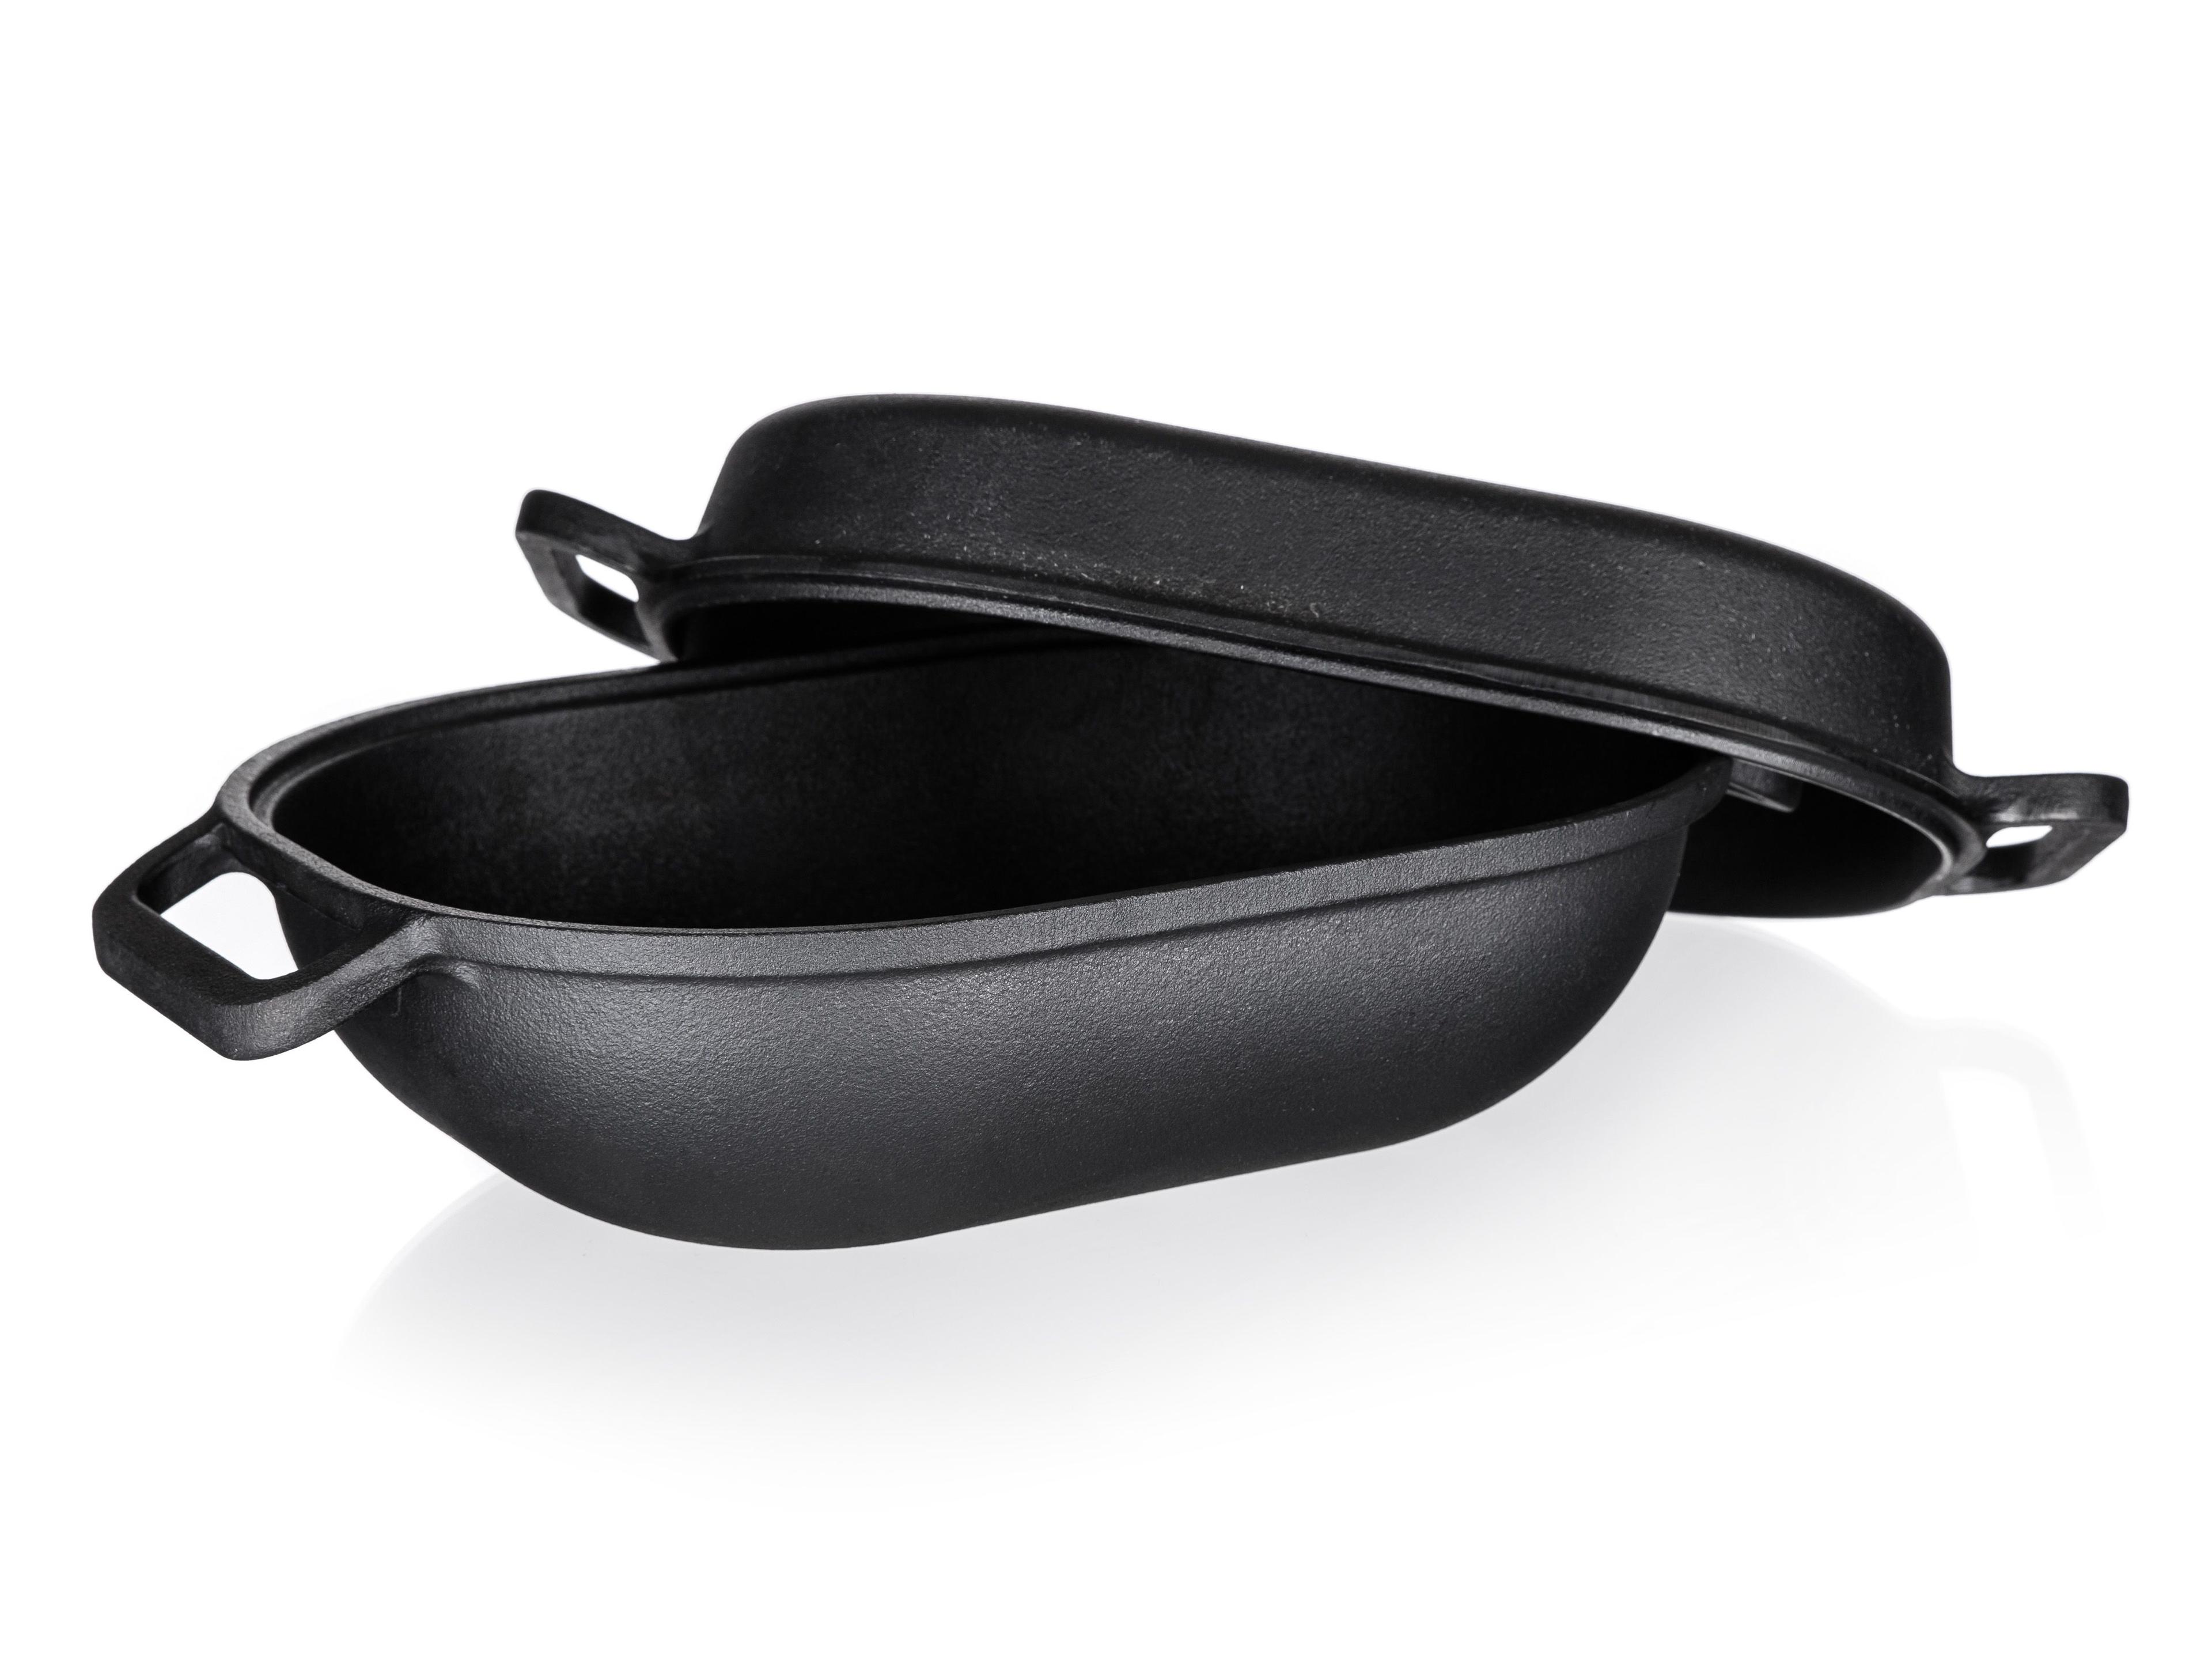 EXCELLENT oval cast iron baking dish with lid with a capacity of 3 + 4 l